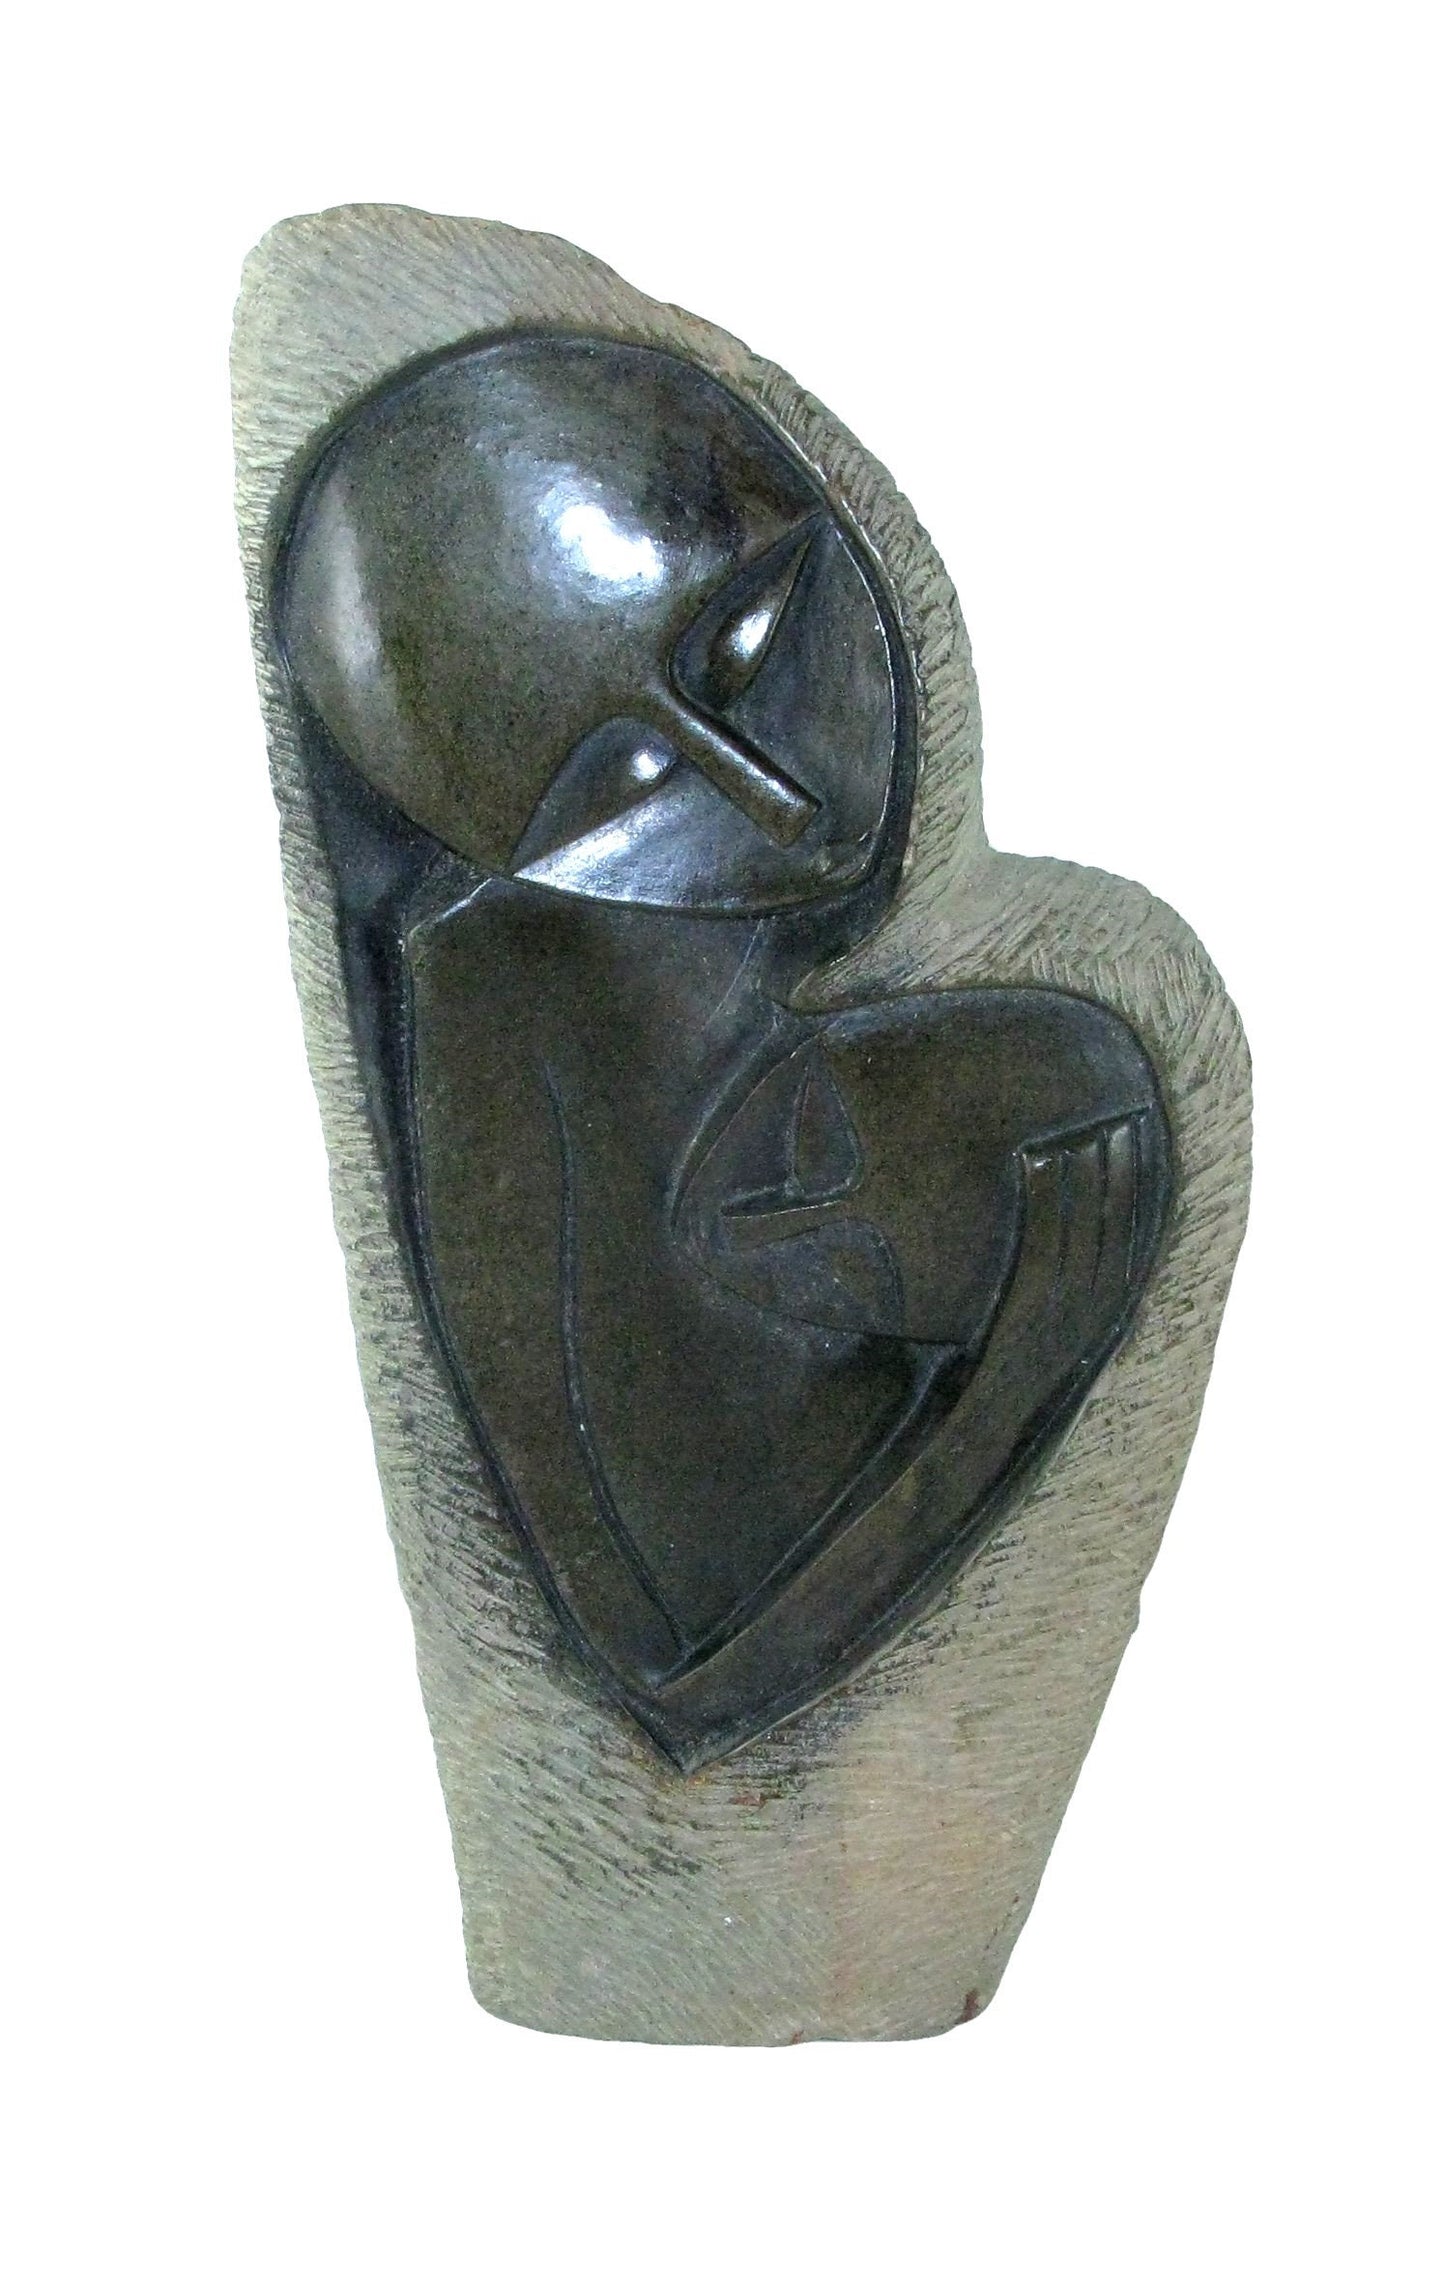 Mother and Child in Arms African Art Stone Sculpture 28 cm by Zimbabwe Artists with Storycard